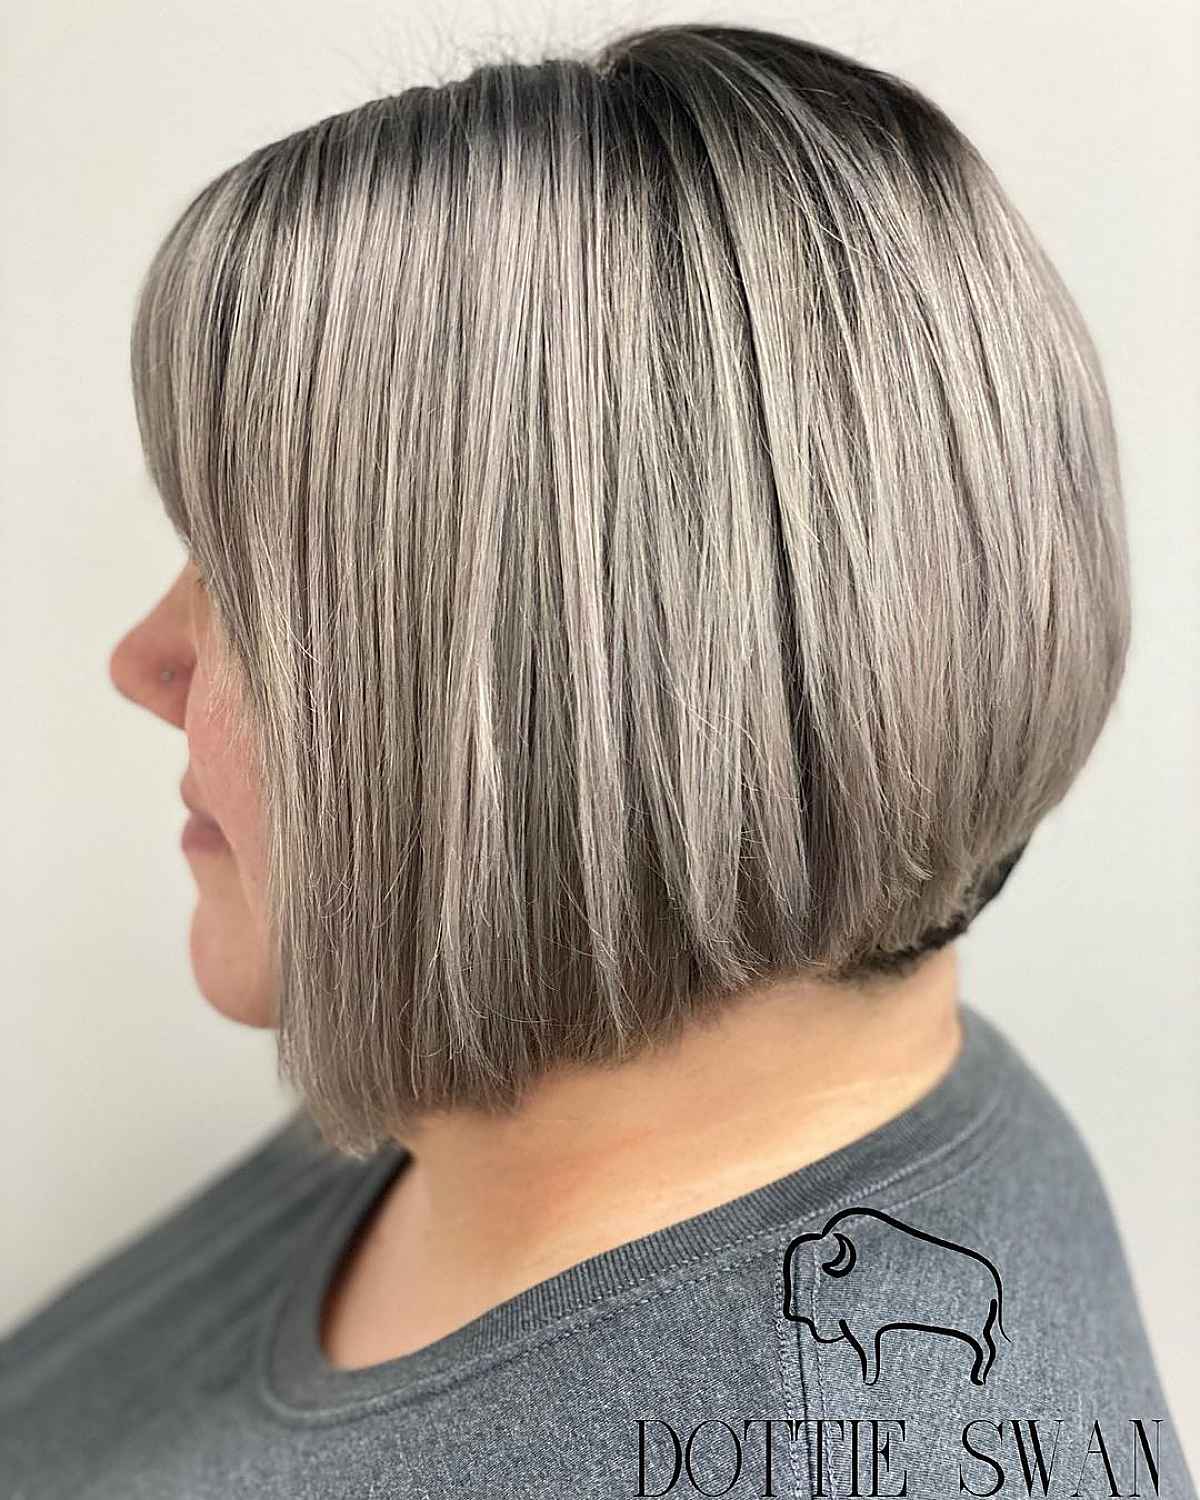 Inverted Bob for Women in Their 40s